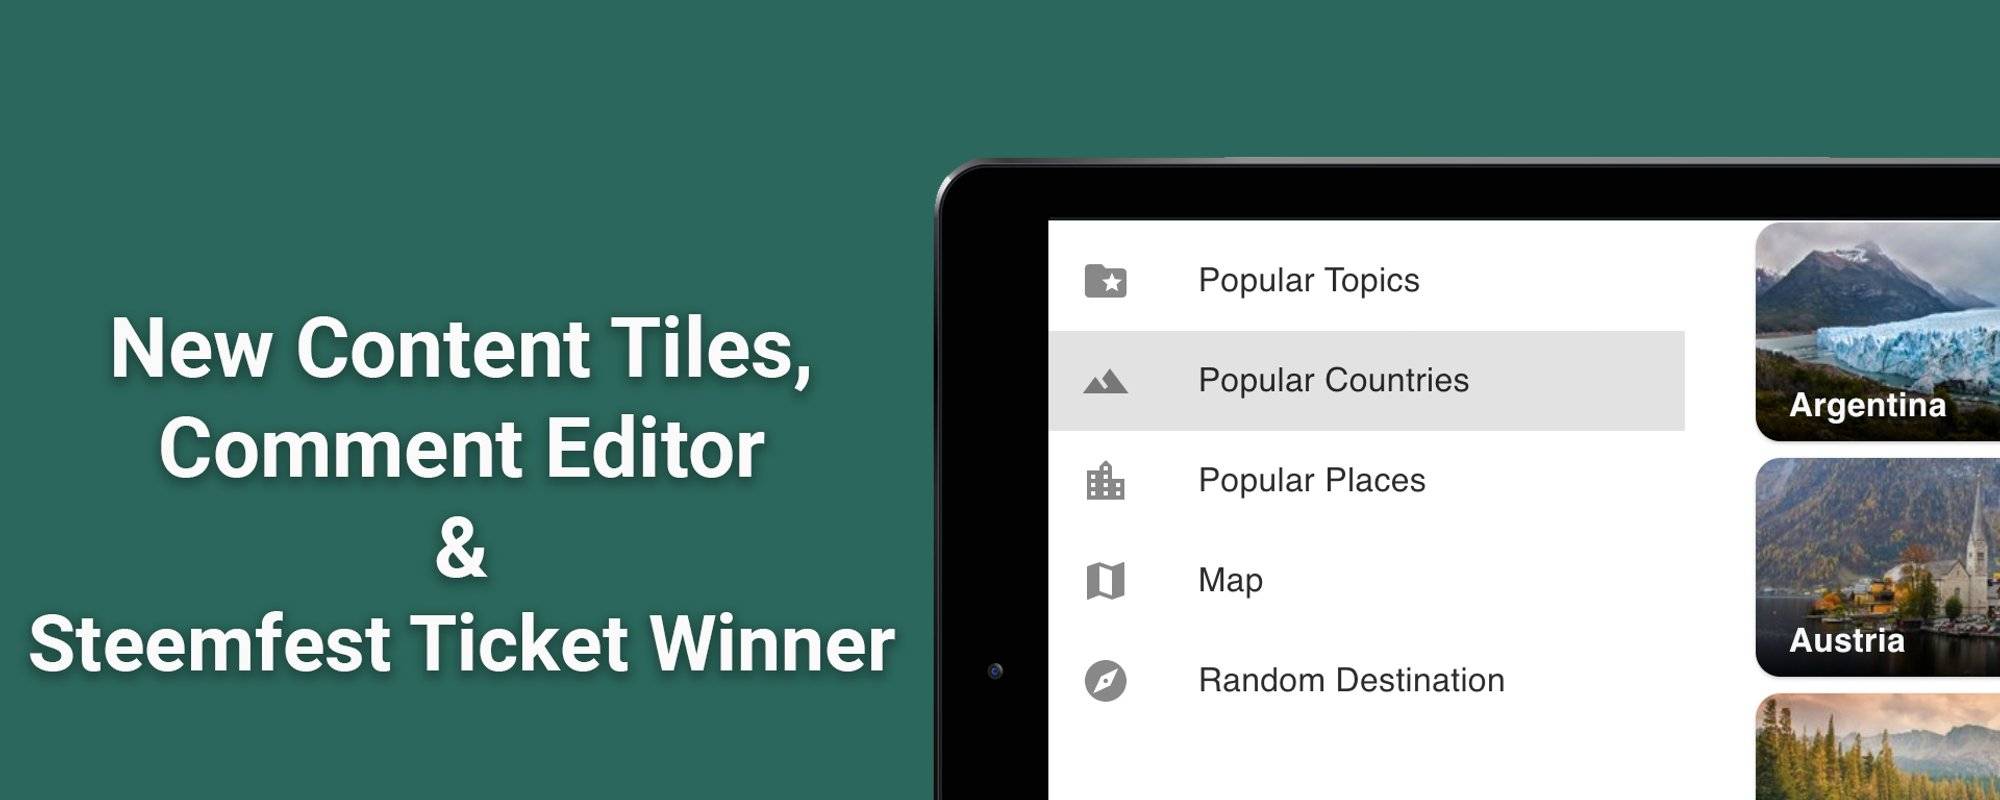 Updates: New Content Tiles - Comment Editor and The Steemfest Ticket Winner.